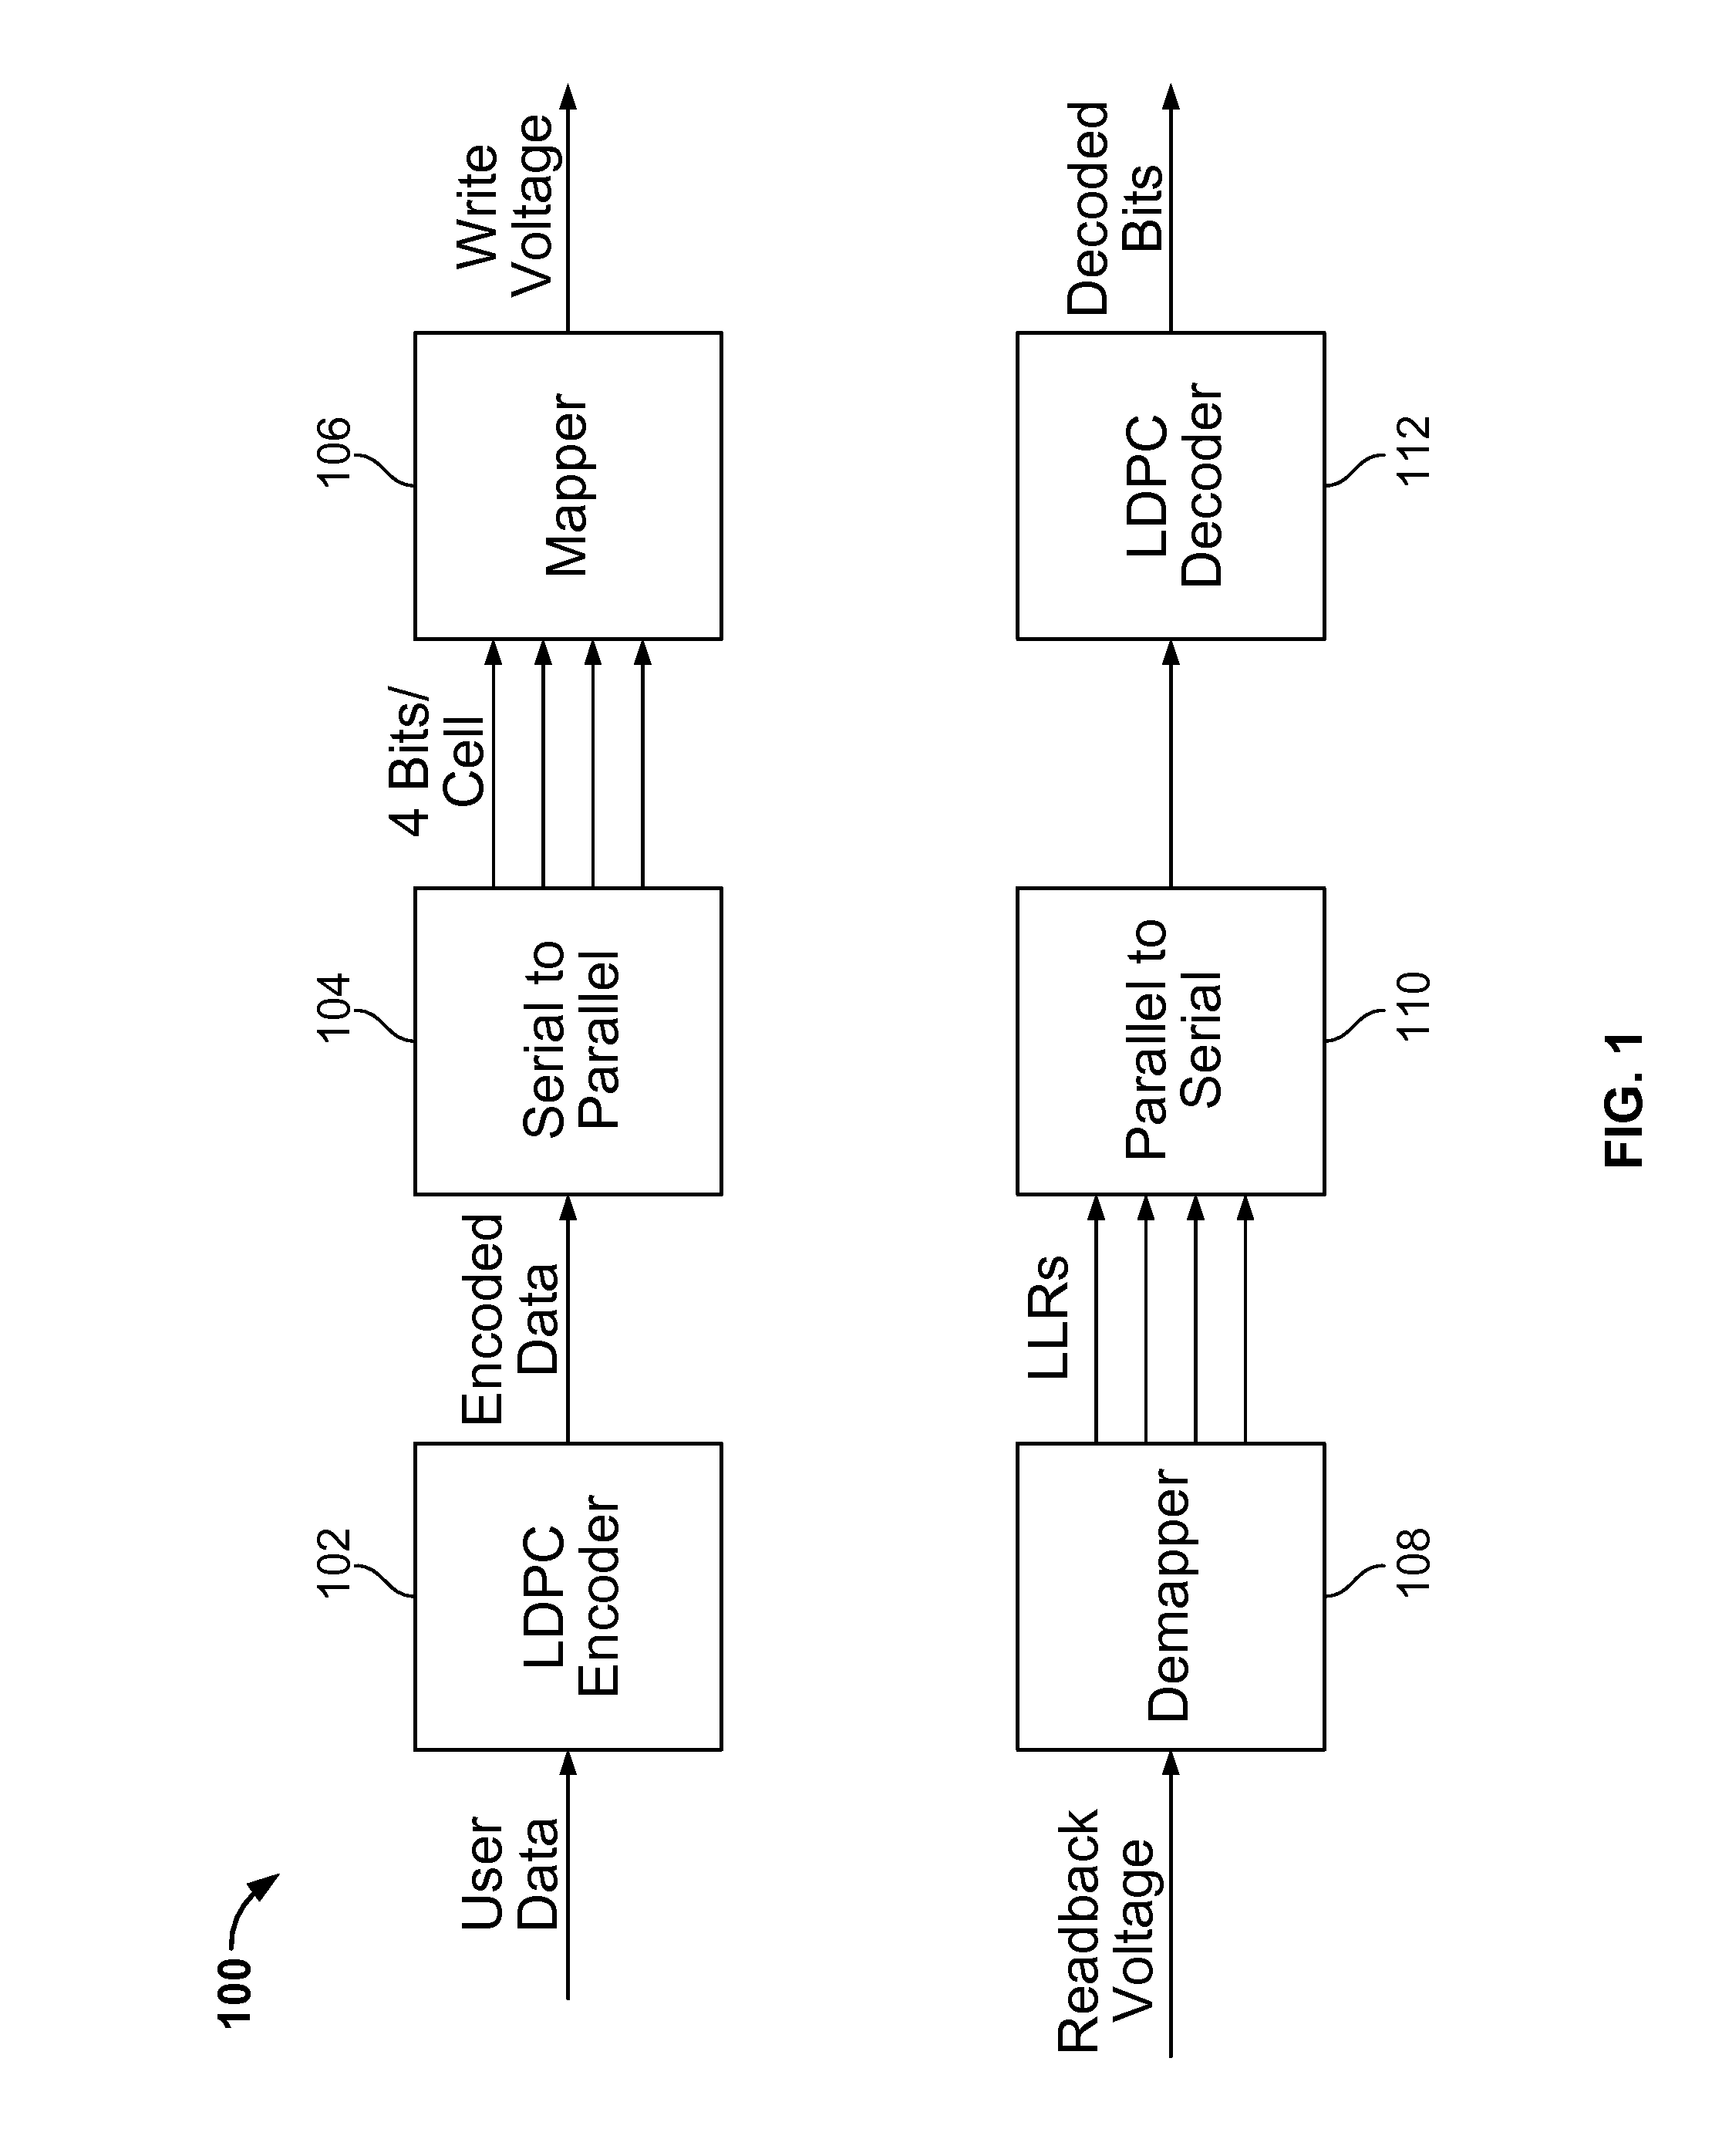 Coding architecture for multi-level NAND flash memory with stuck cells